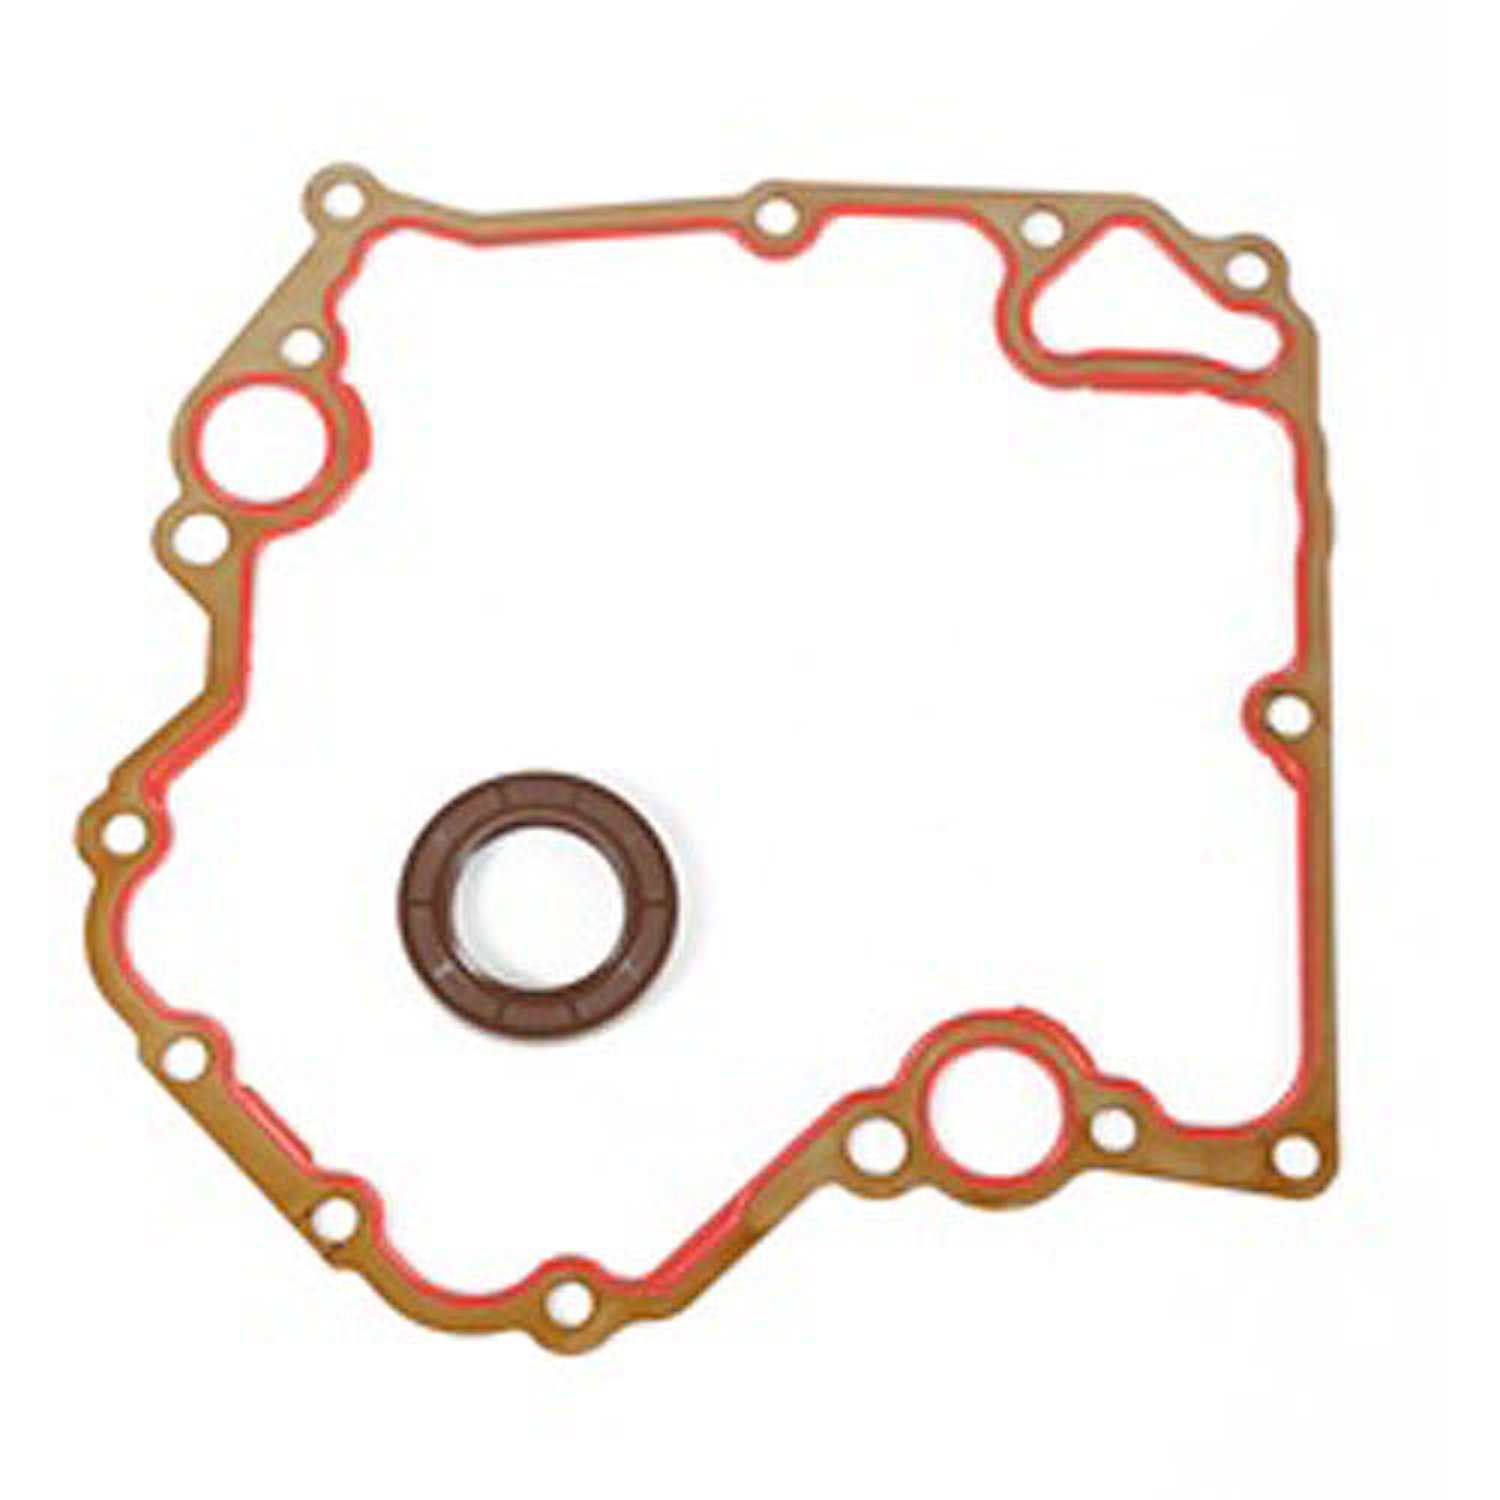 This timing cover gasket set from Omix-ADA fits the 4.7L engine in 99-03 Jeep Grand Cherokees.